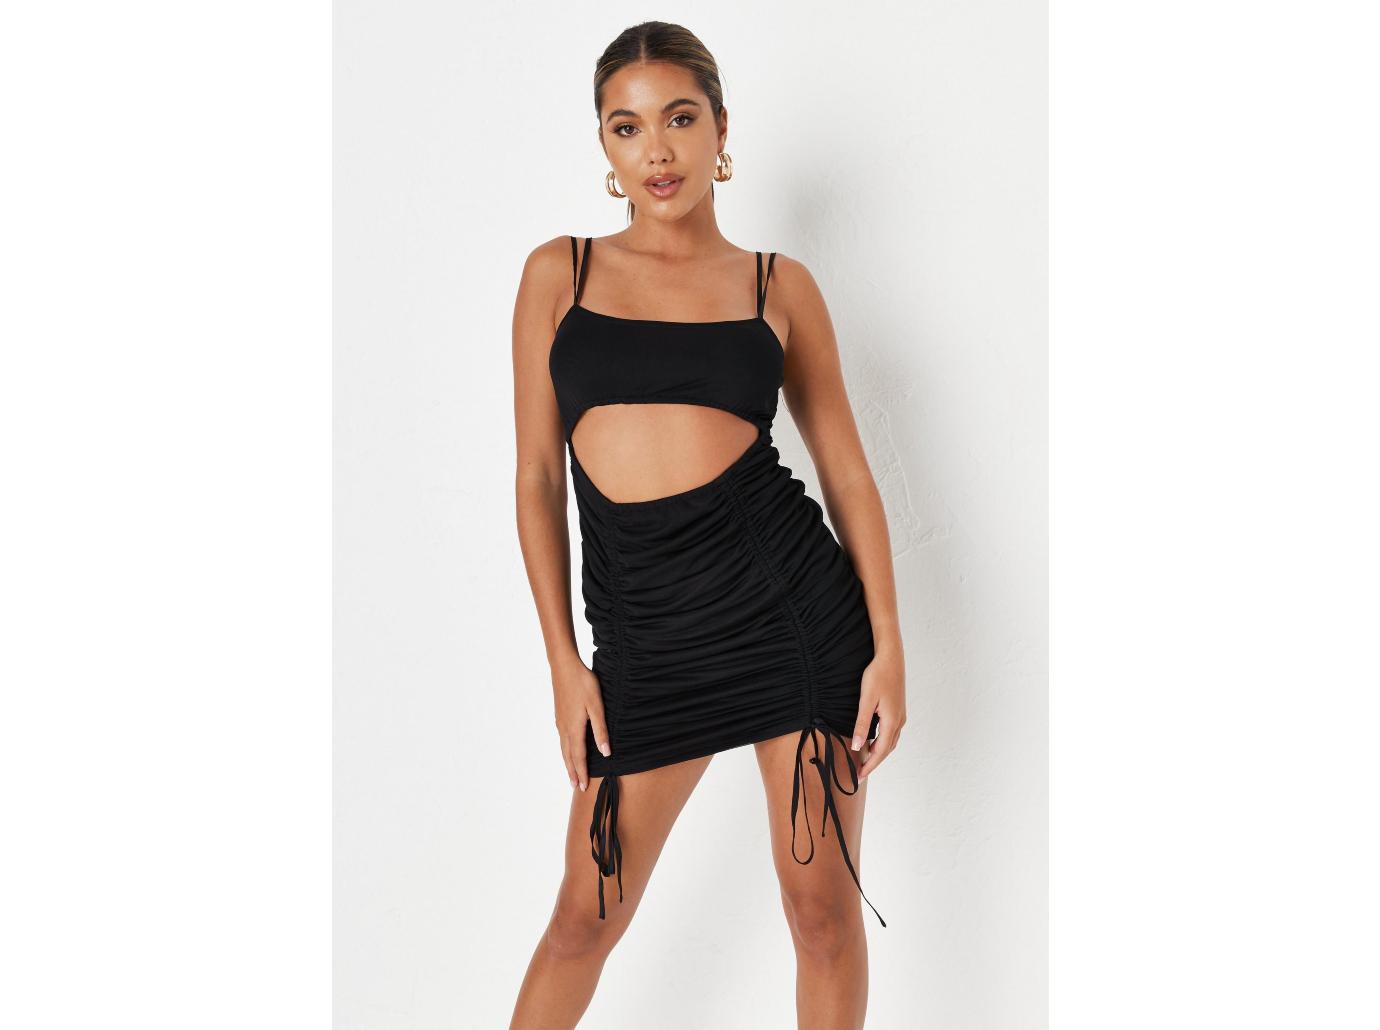 Missguided - Warning: this dress may cause texts from your ex ⚠️ Shop  @theerealkarlaj's look with the 'black vinyl bandeau mini dress' (£15/$25)  online now missgu.id/QNsSUA ⚡#babesofmissguided